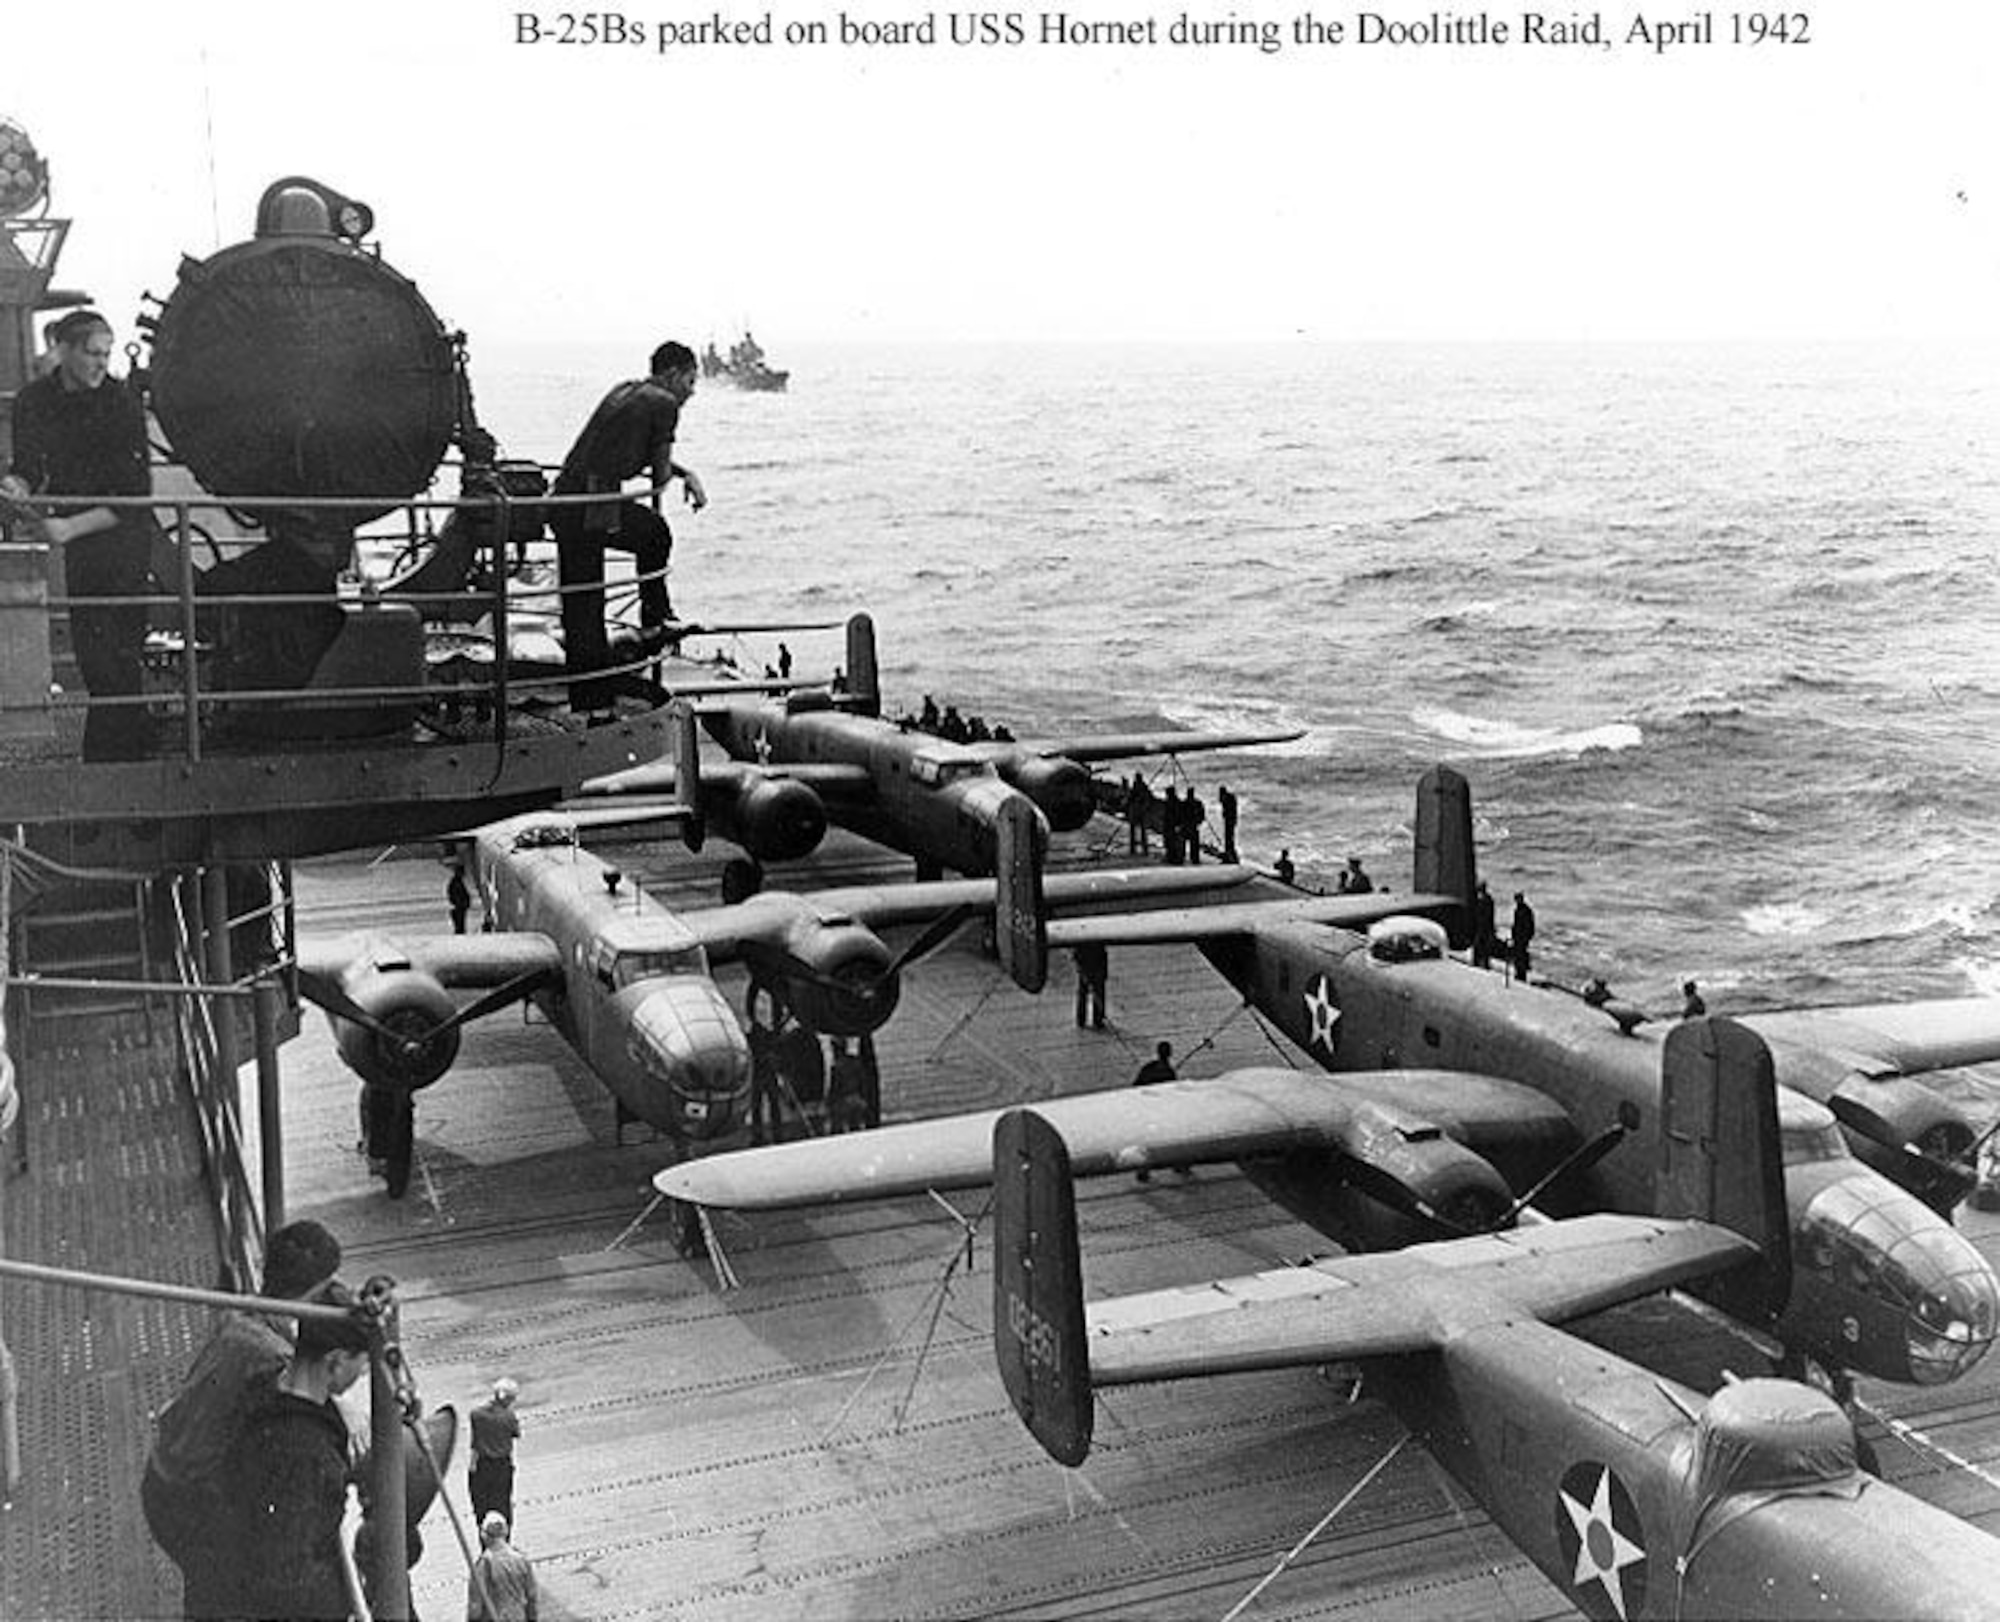 United States Army Air Forces B-25 bombers are tied down to the deck of the USS Hornet before the "Doolittle Raid" on Tokyo, Saturday, April 18, 1942.